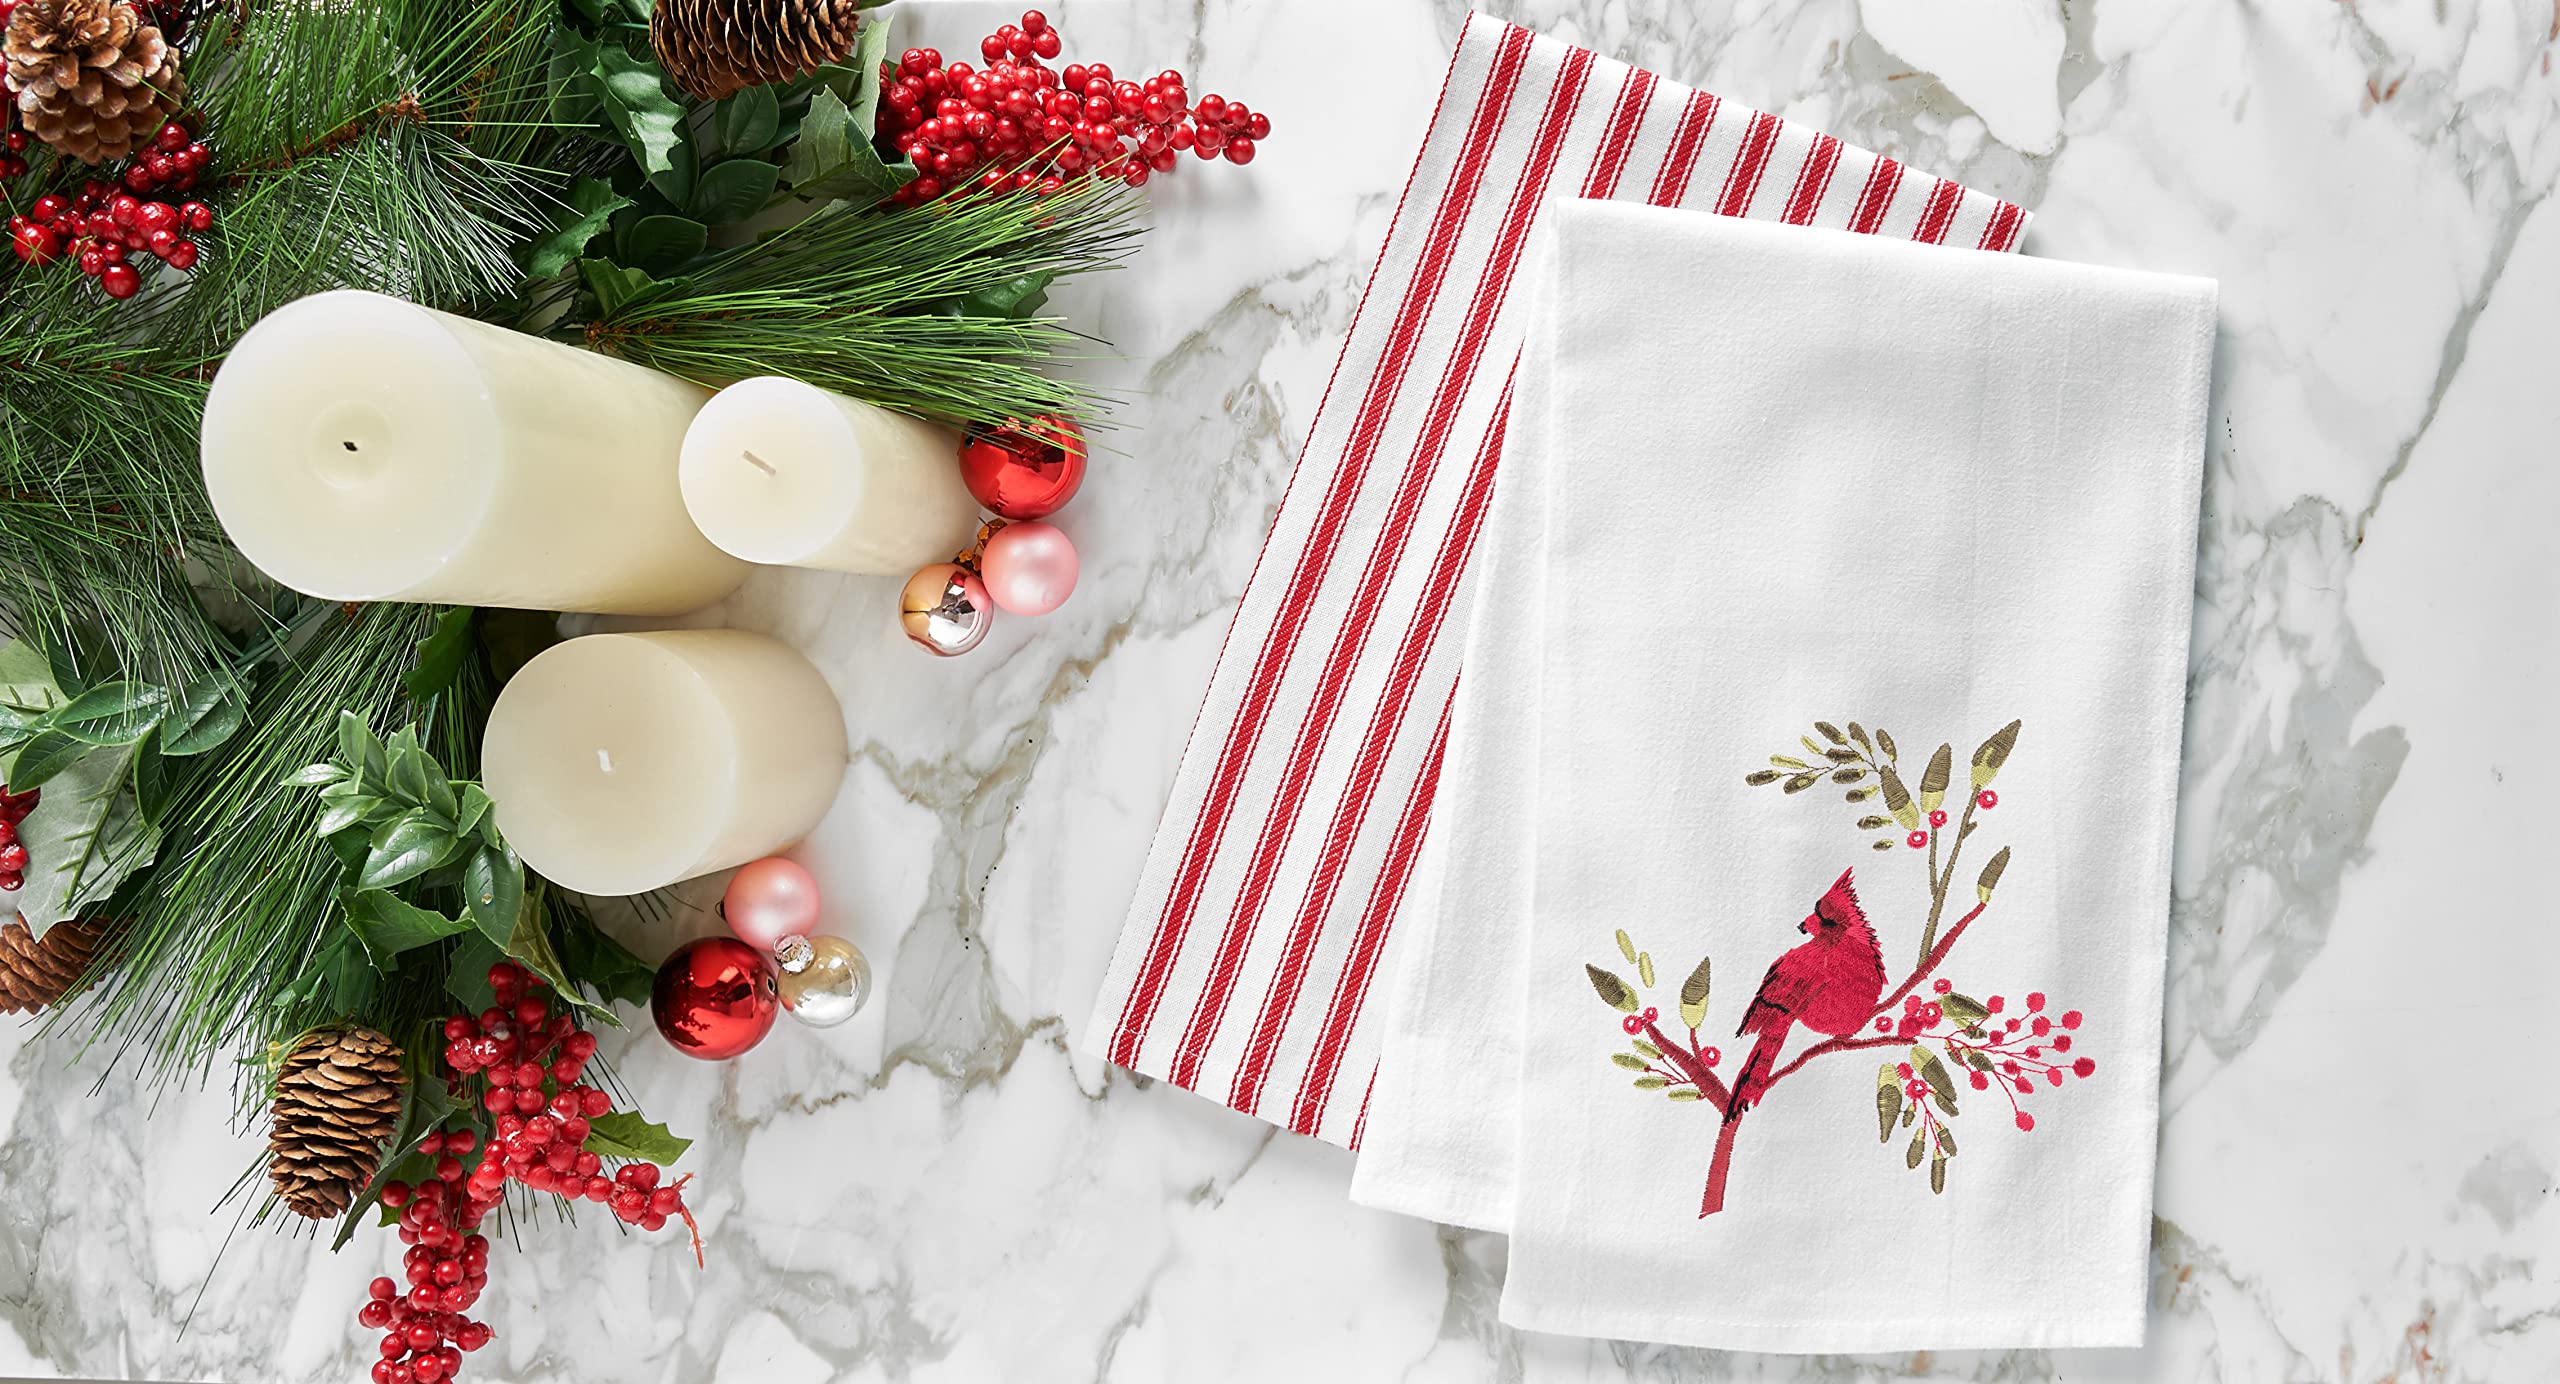 C&F Home Holiday Winter Themed Single Red Cardinal Embroidered Sitting on Red Berry Tree Flour Sack Christmas Dishtowel Decor Decoration 27L x 18W in. 18" x 27" White